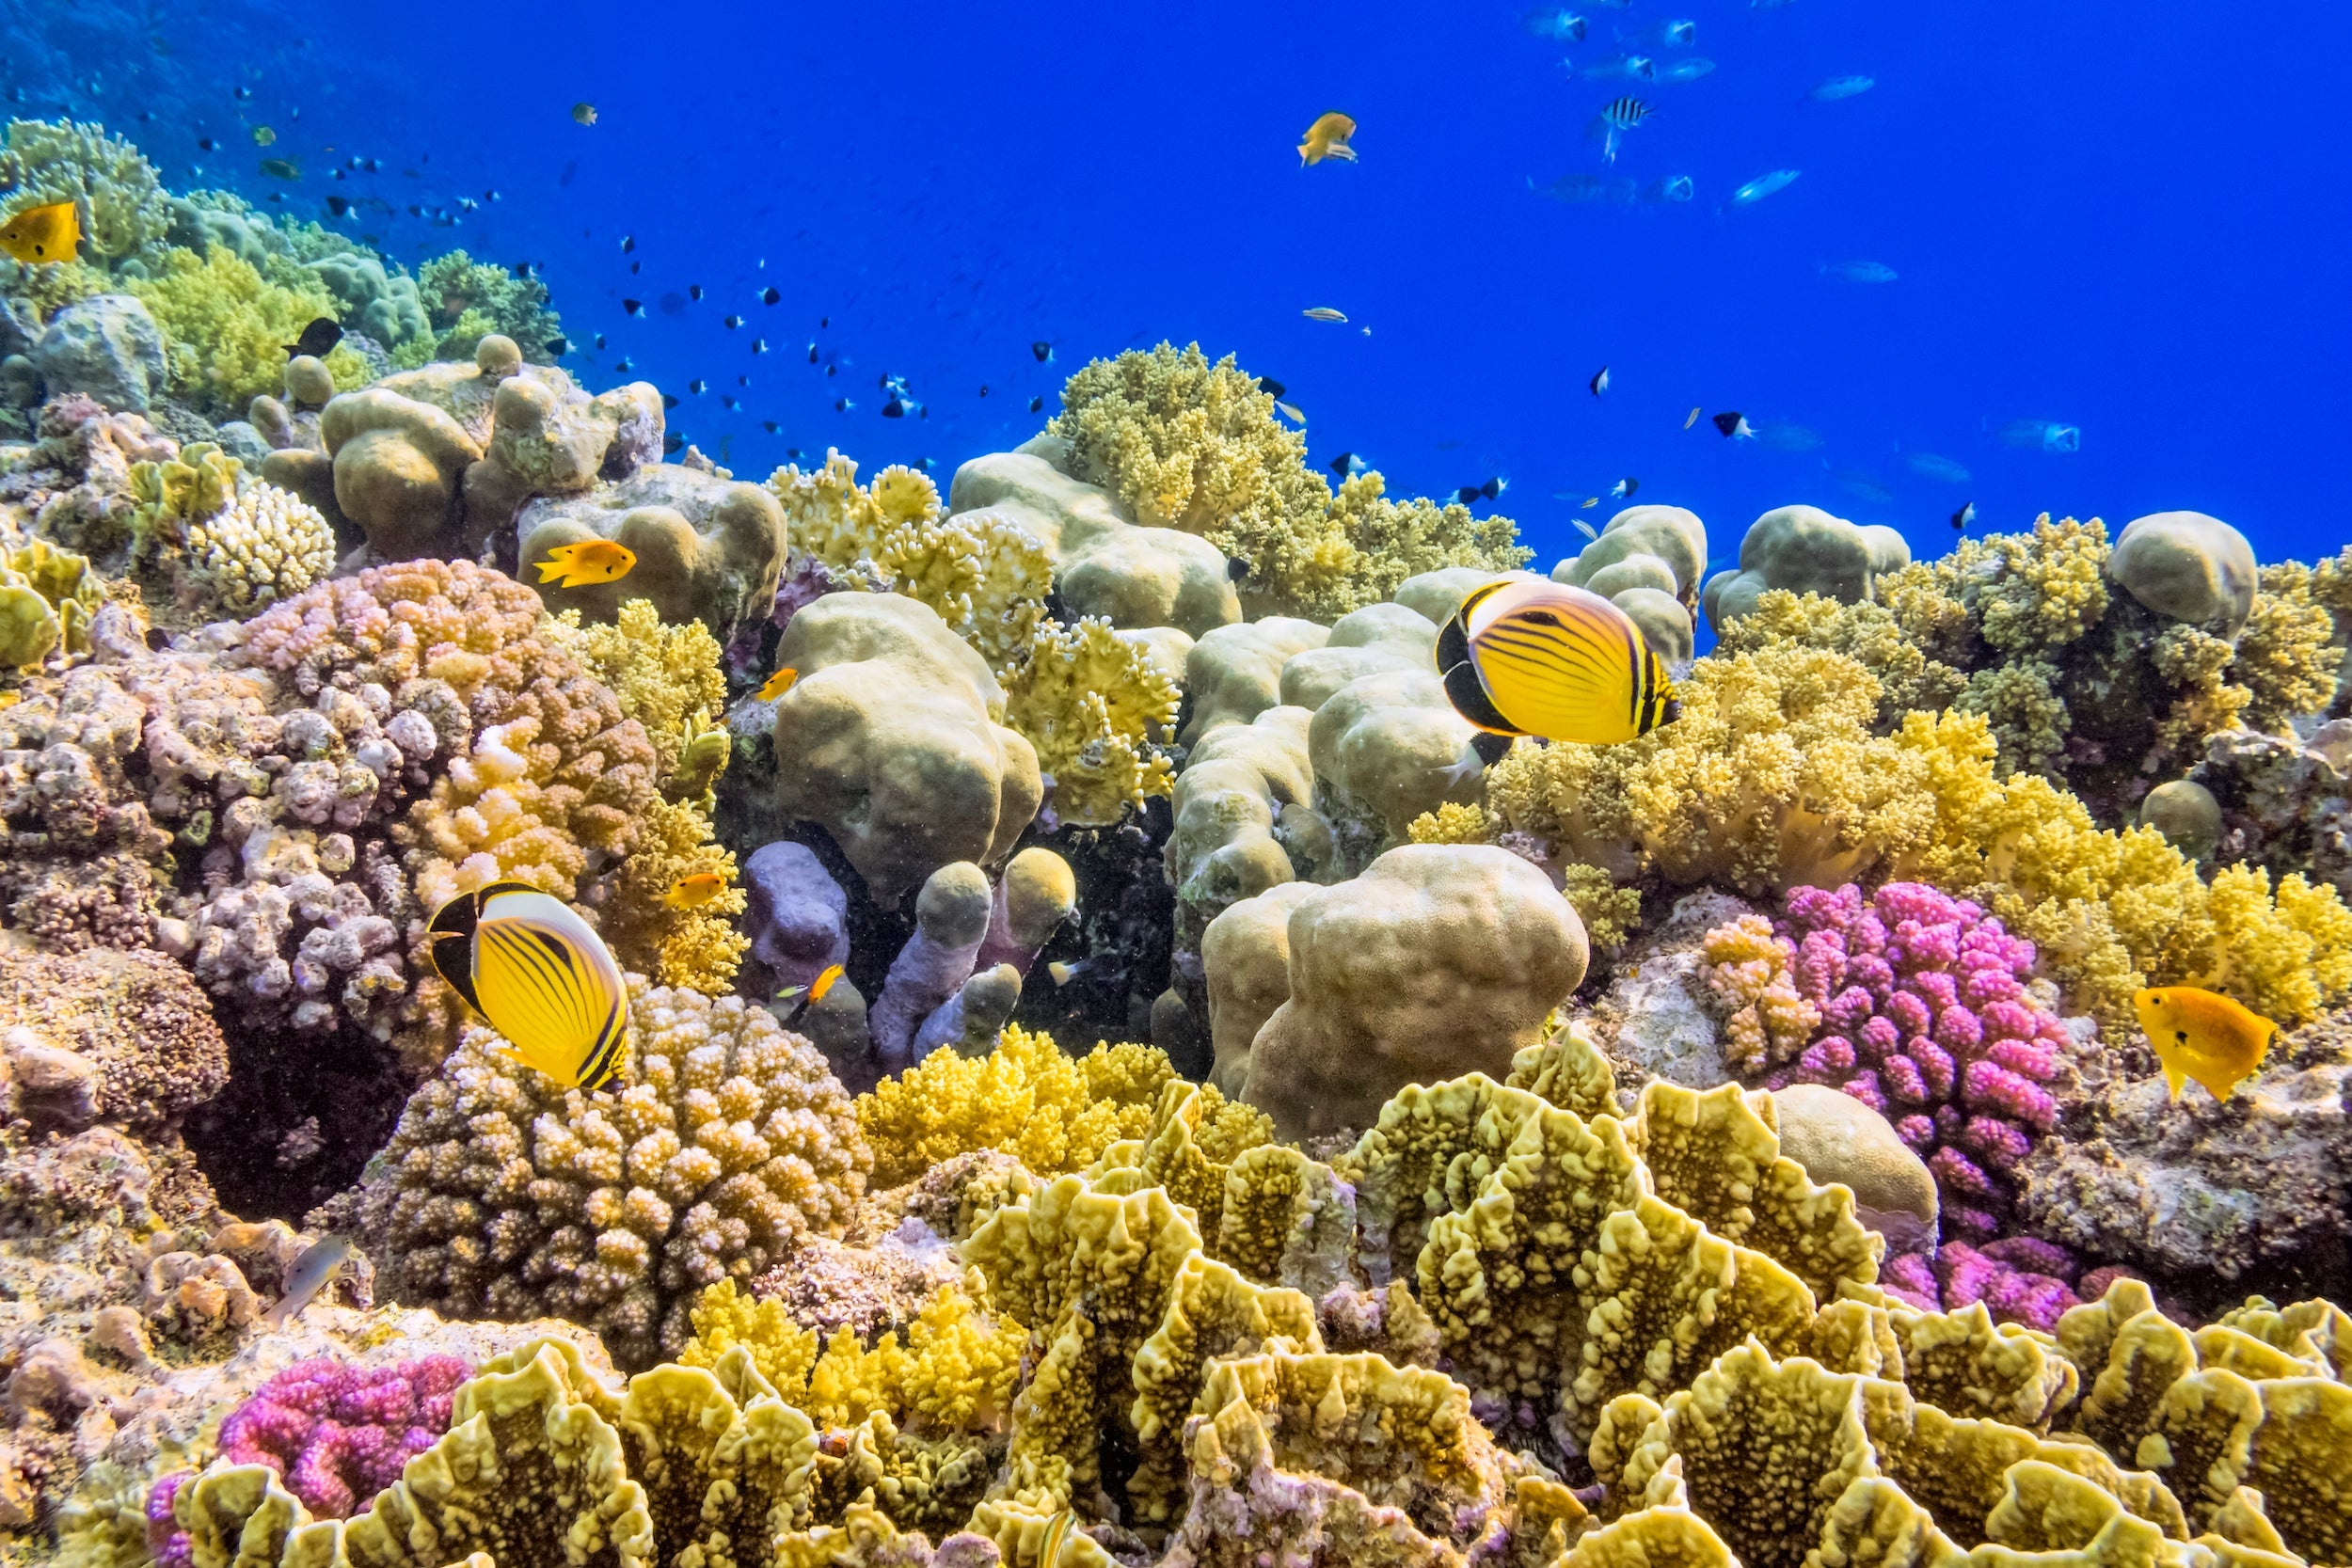 Where can you find coral reefs